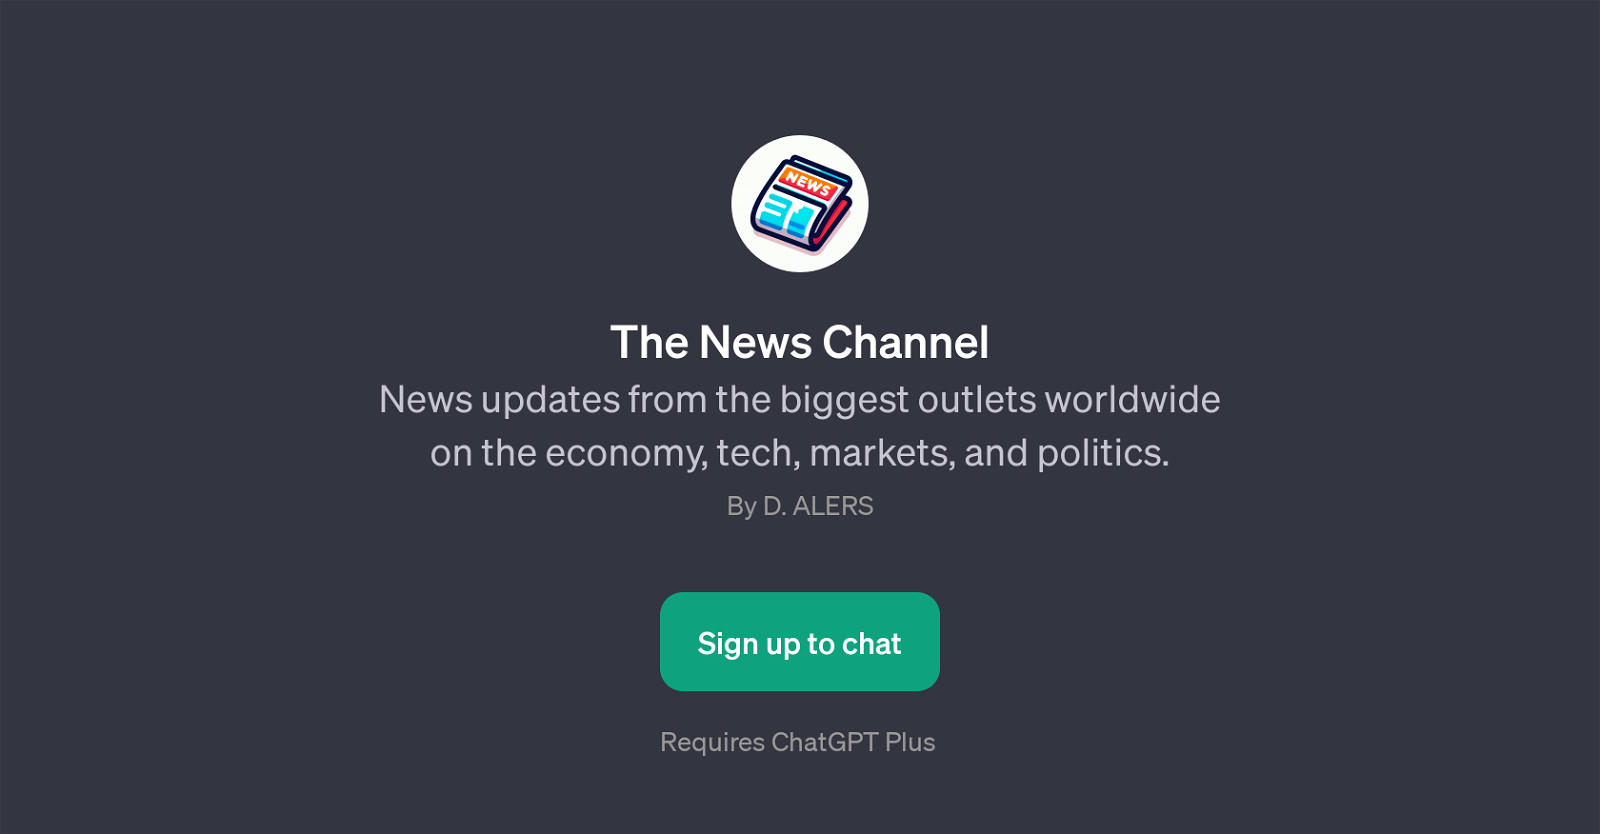 The News Channel website